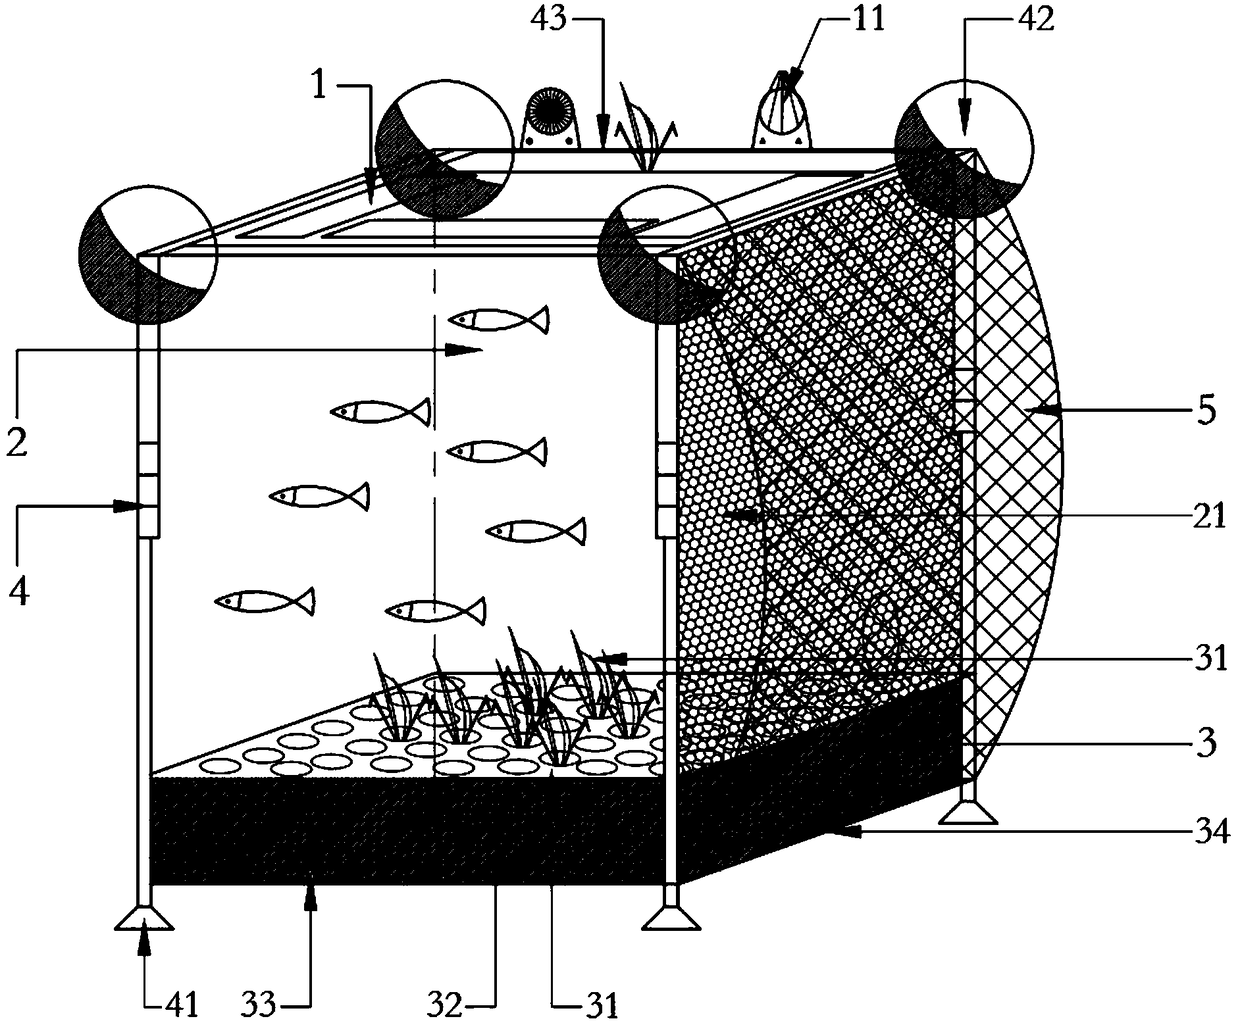 Snail-fish-grass stereo integrated system for controlling eutrophication of water body